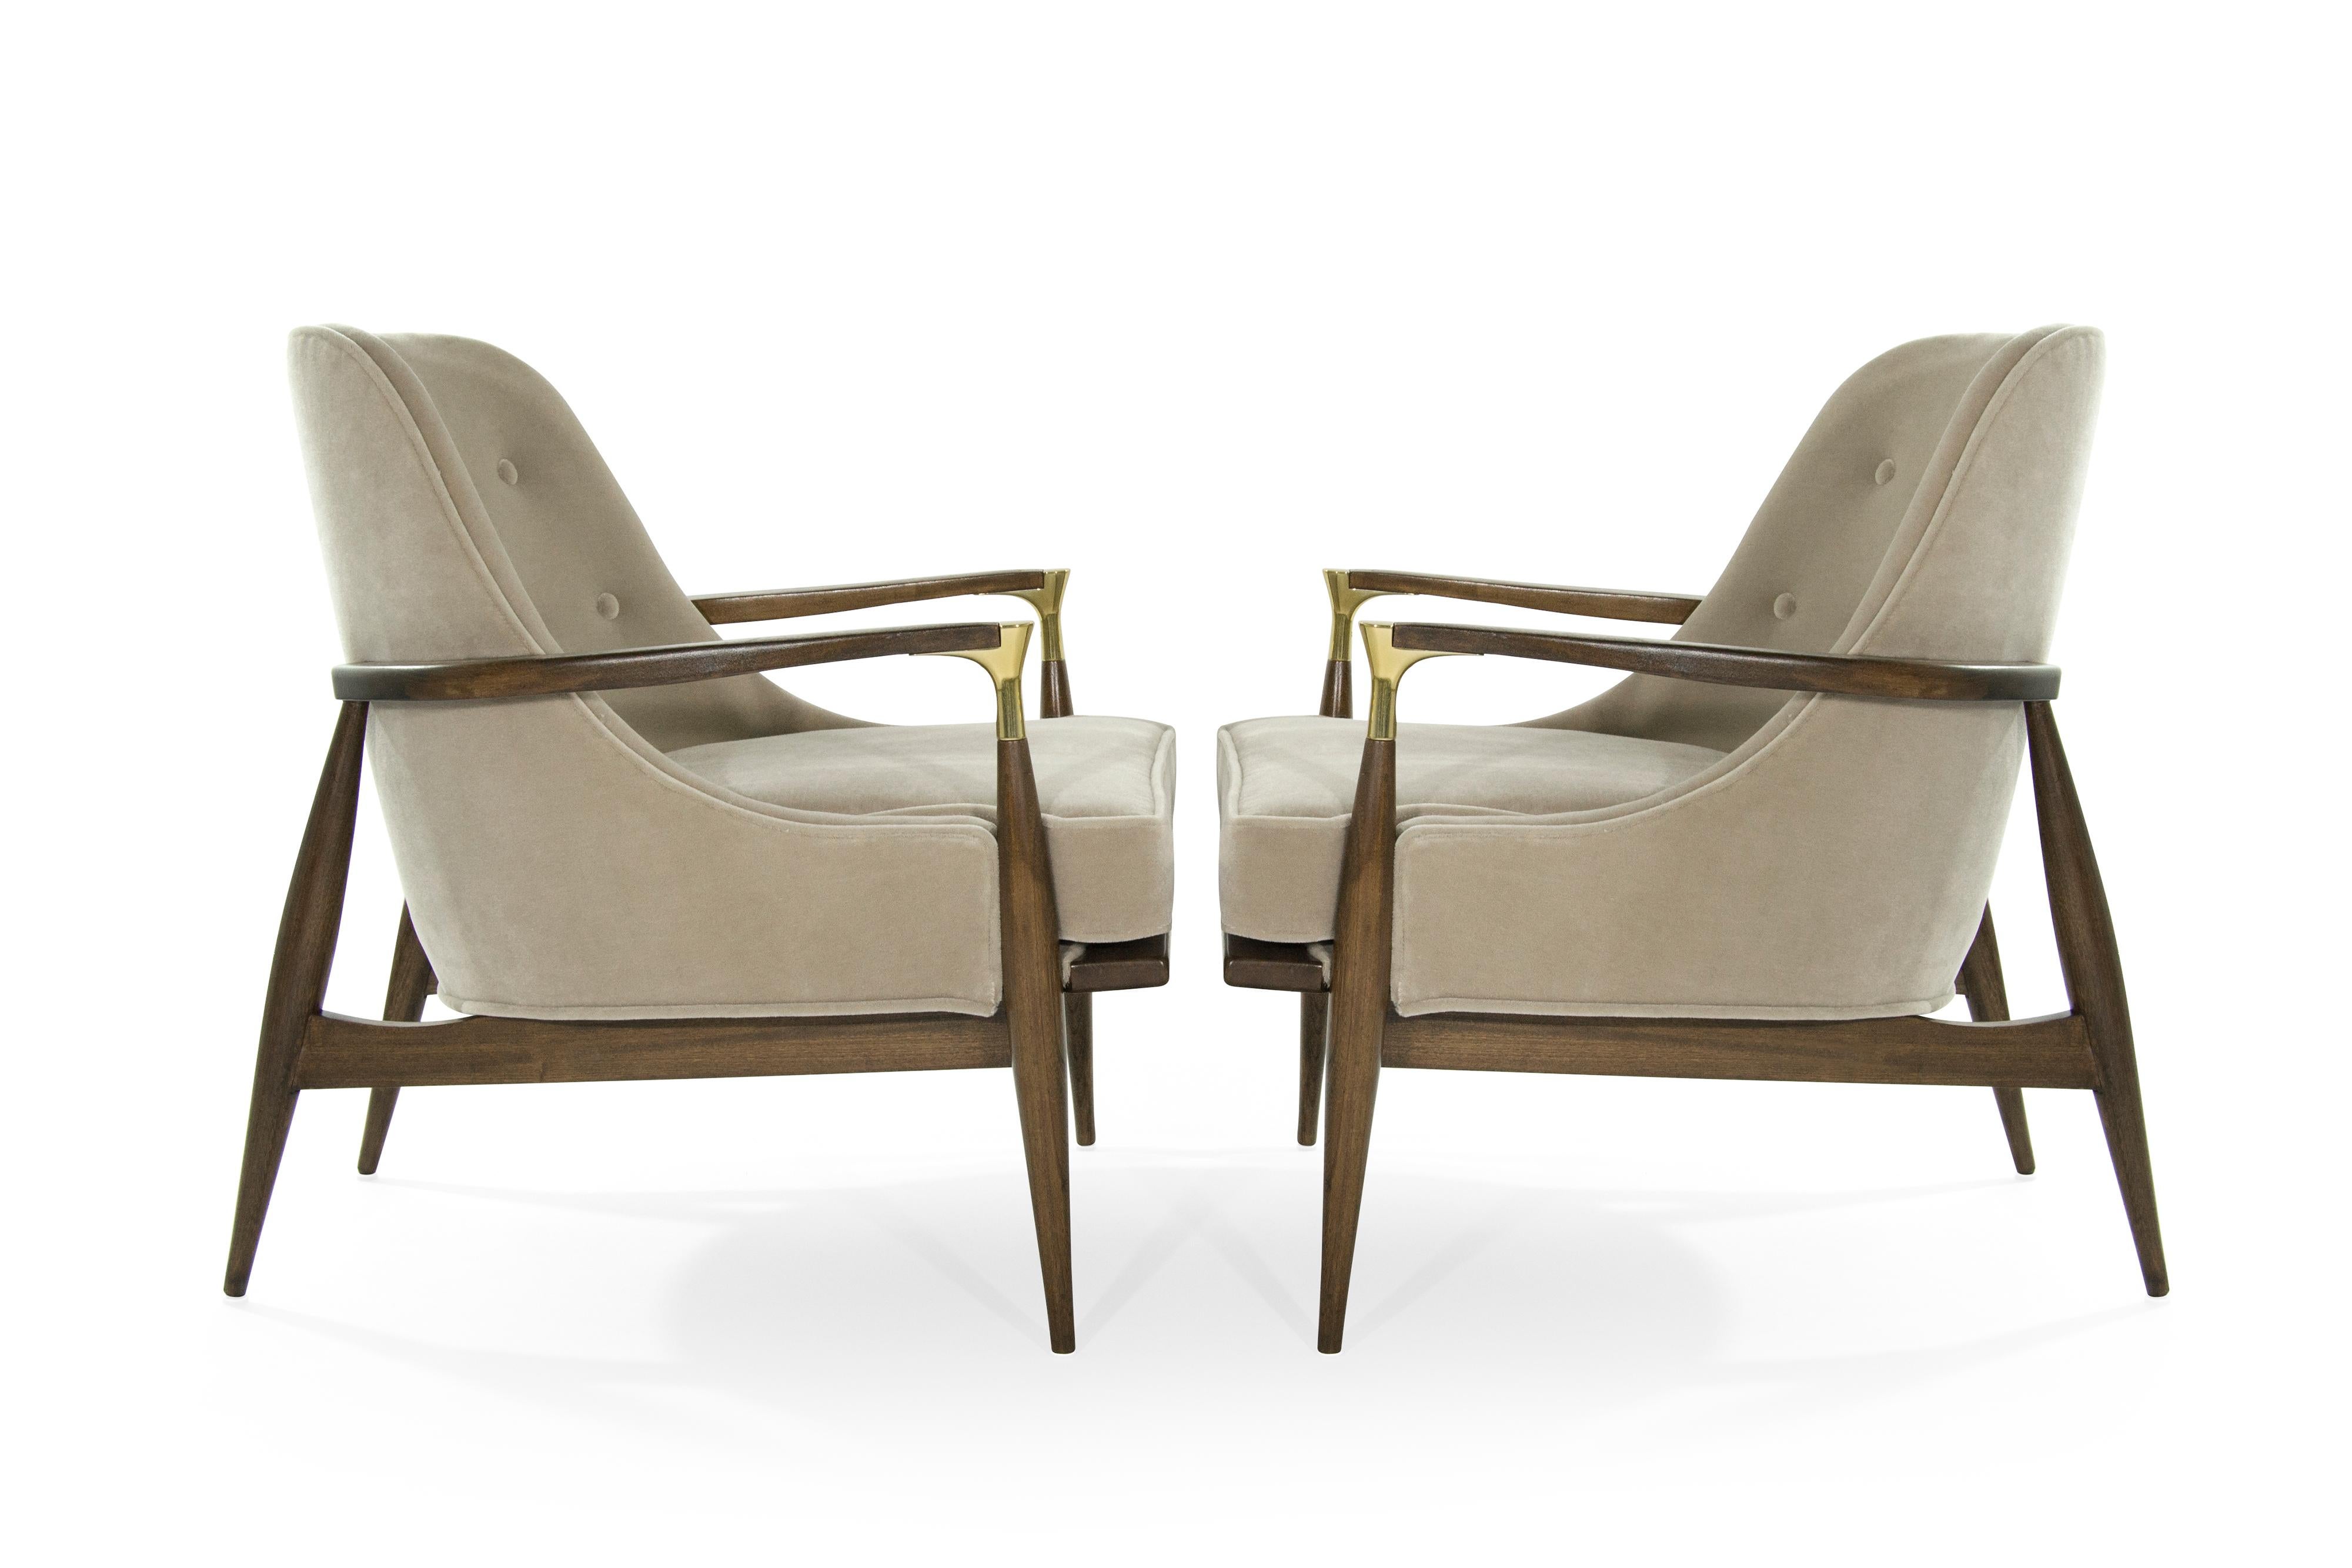 Rare lounge pair of chairs in the style of Ib Kofod-Larsen. Featuring brass details on arms. Newly upholstered in natural mohair. Sculptural walnut frames completely restored.